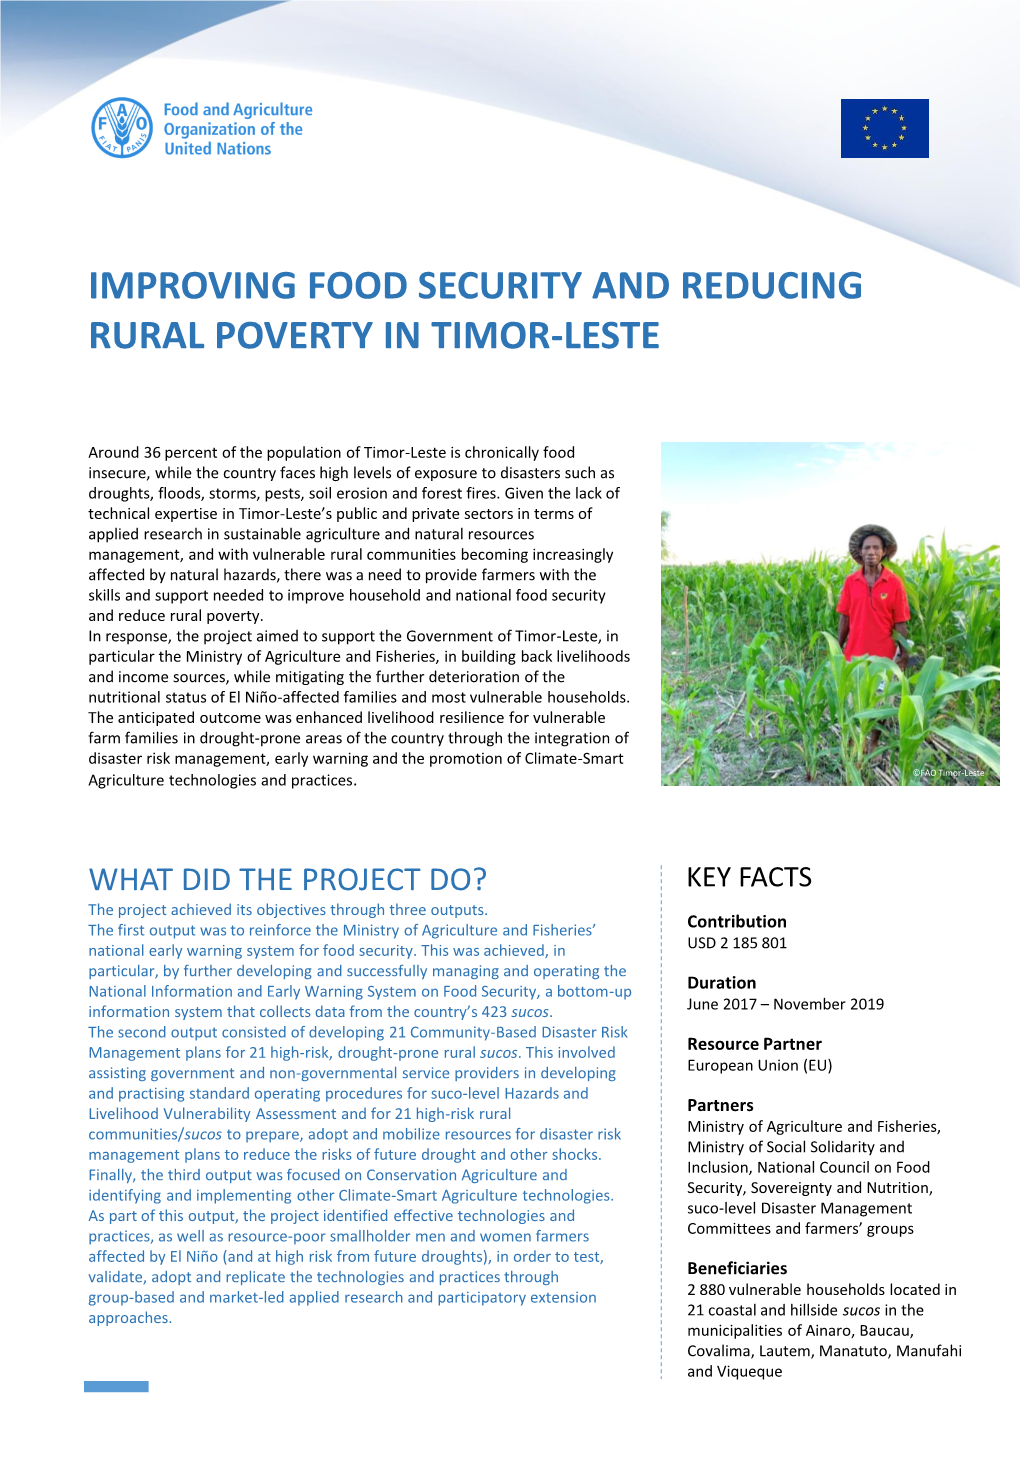 Improving Food Security and Reducing Rural Poverty in Timor-Leste